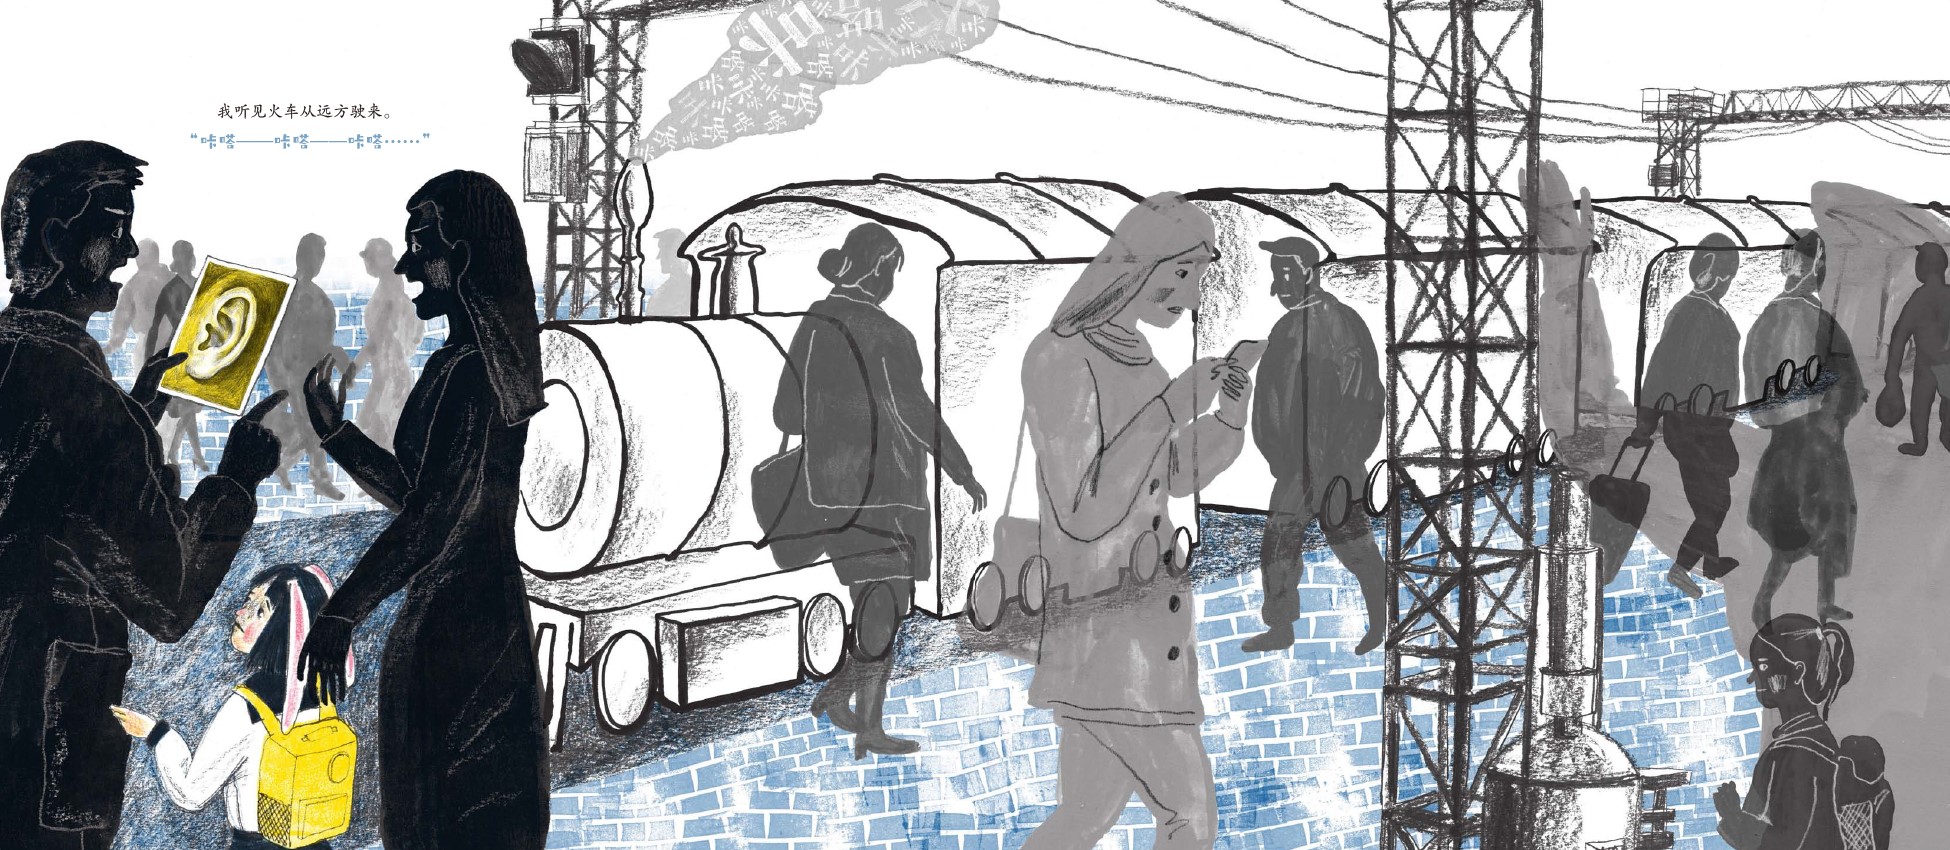 Spread from I Hear the Singing From Everything, featuring illustration of people in train station